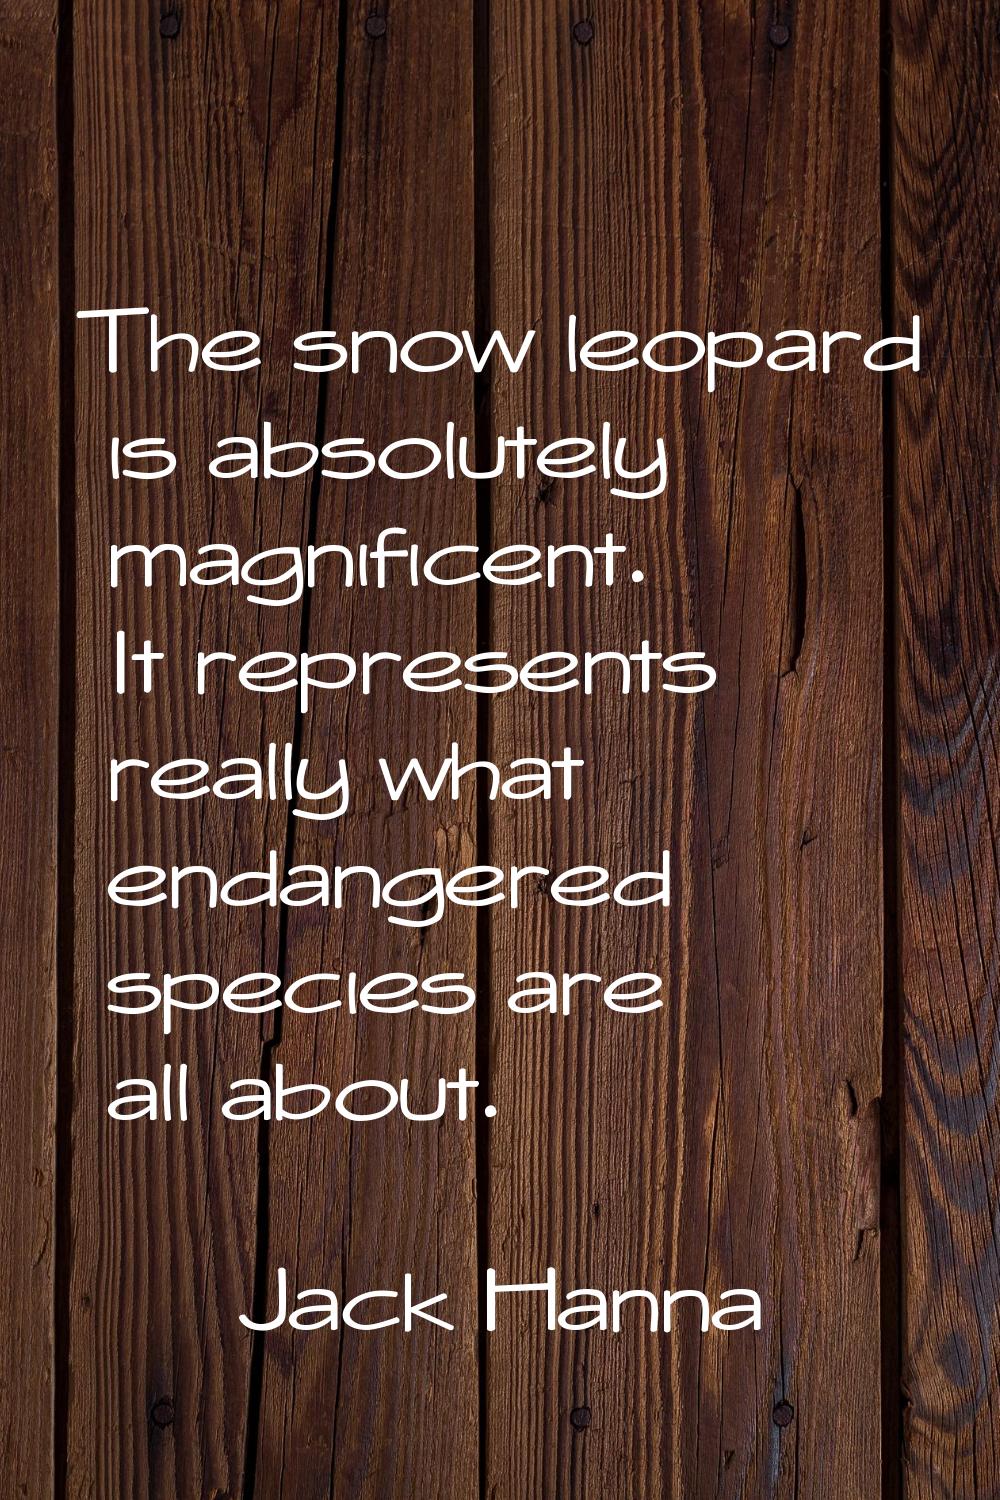 The snow leopard is absolutely magnificent. It represents really what endangered species are all ab